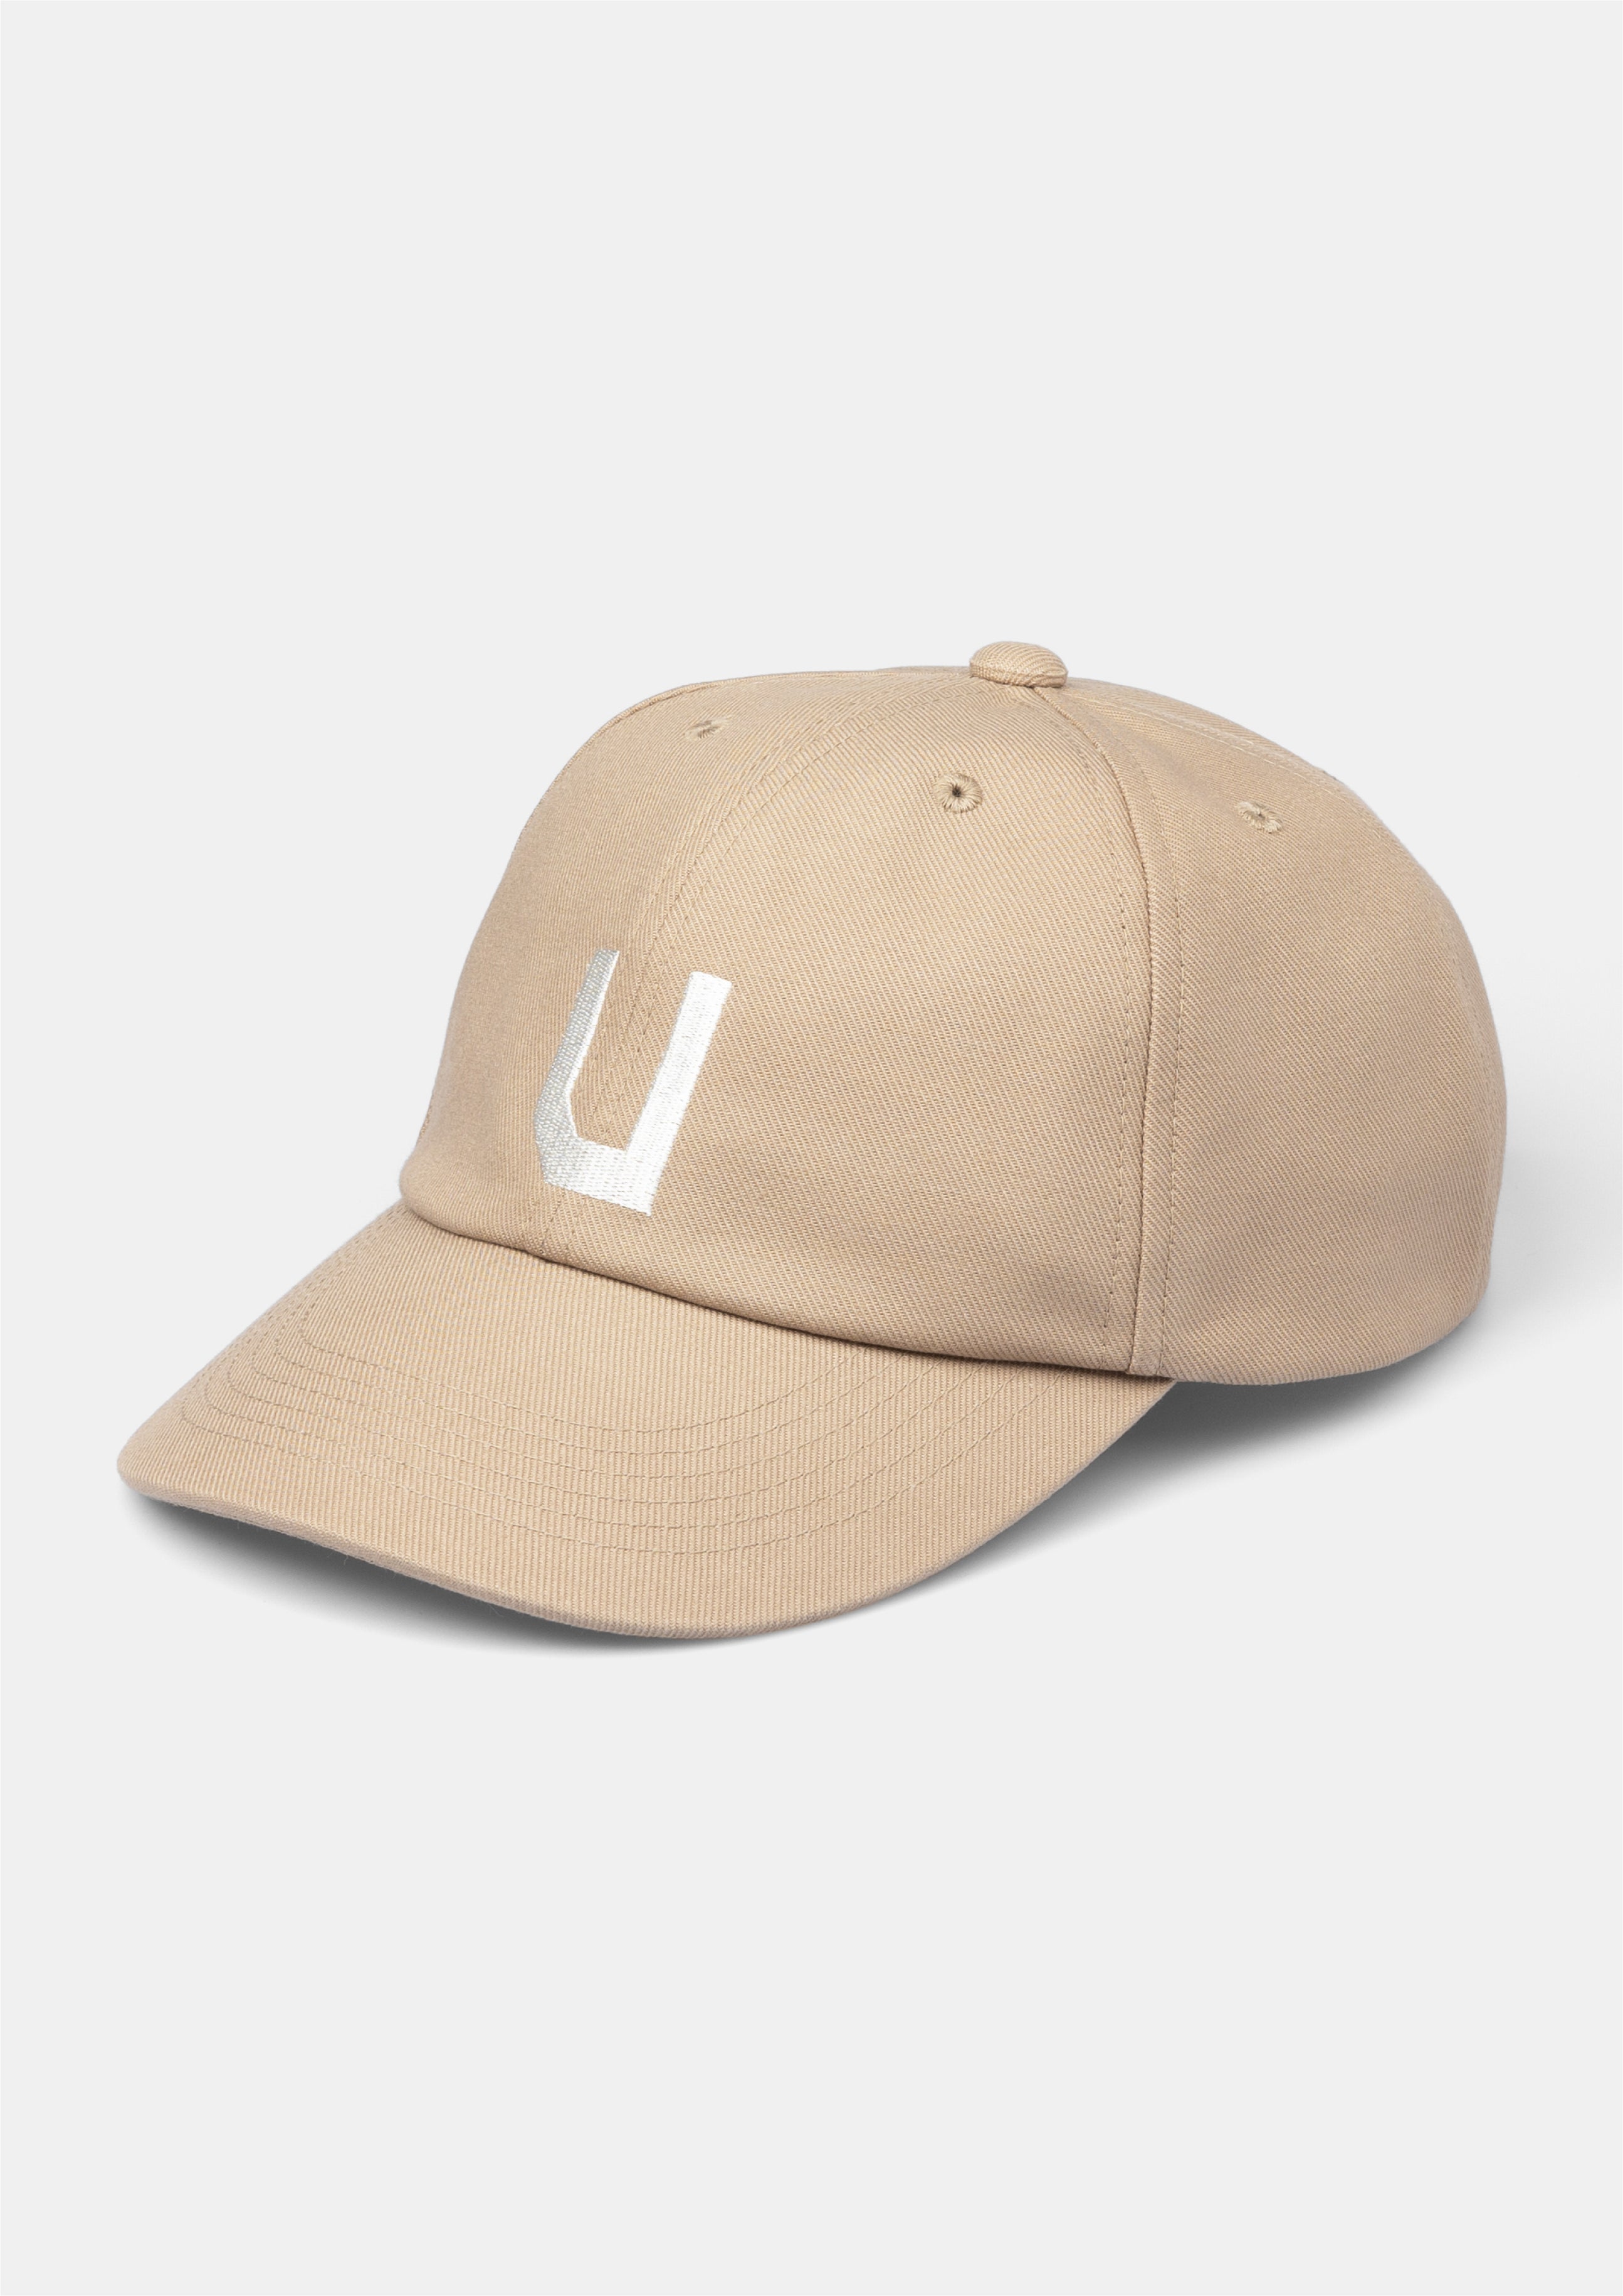 UNNAMED HEADWEAR MIDDLE CAP ベースボールキャップ 大きいサイズの帽子